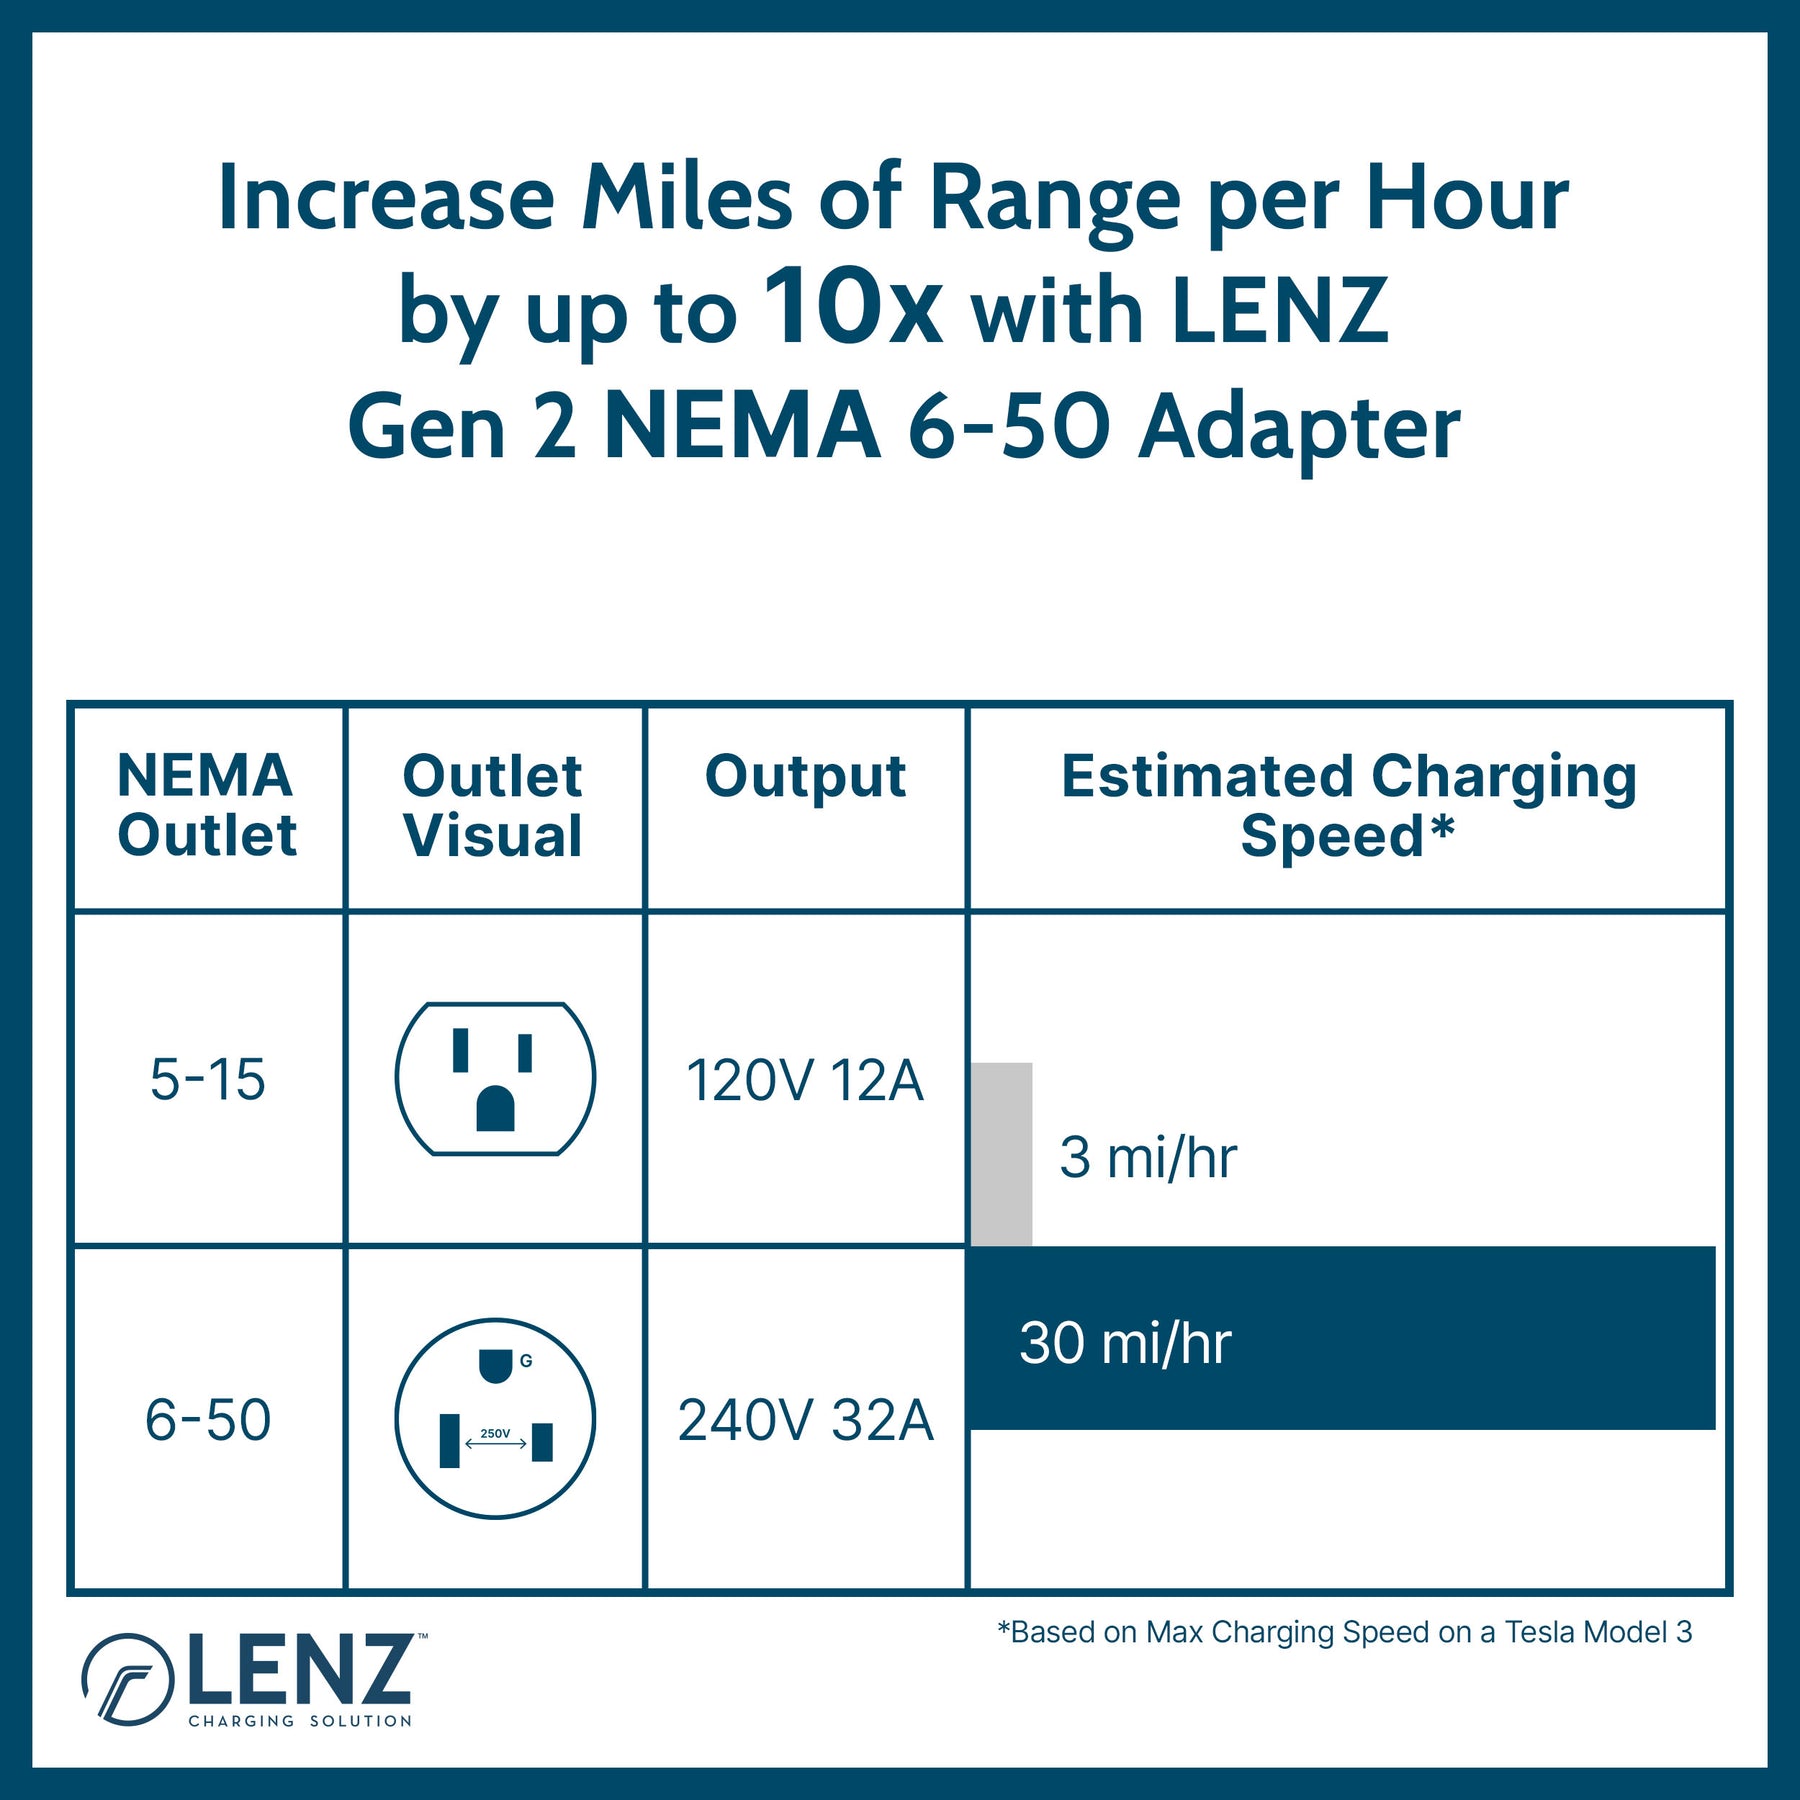 Compared to charging with standard 5-15 NEMA Adapter, charging speed is up to 10x with LENZ 6-50 Adapter